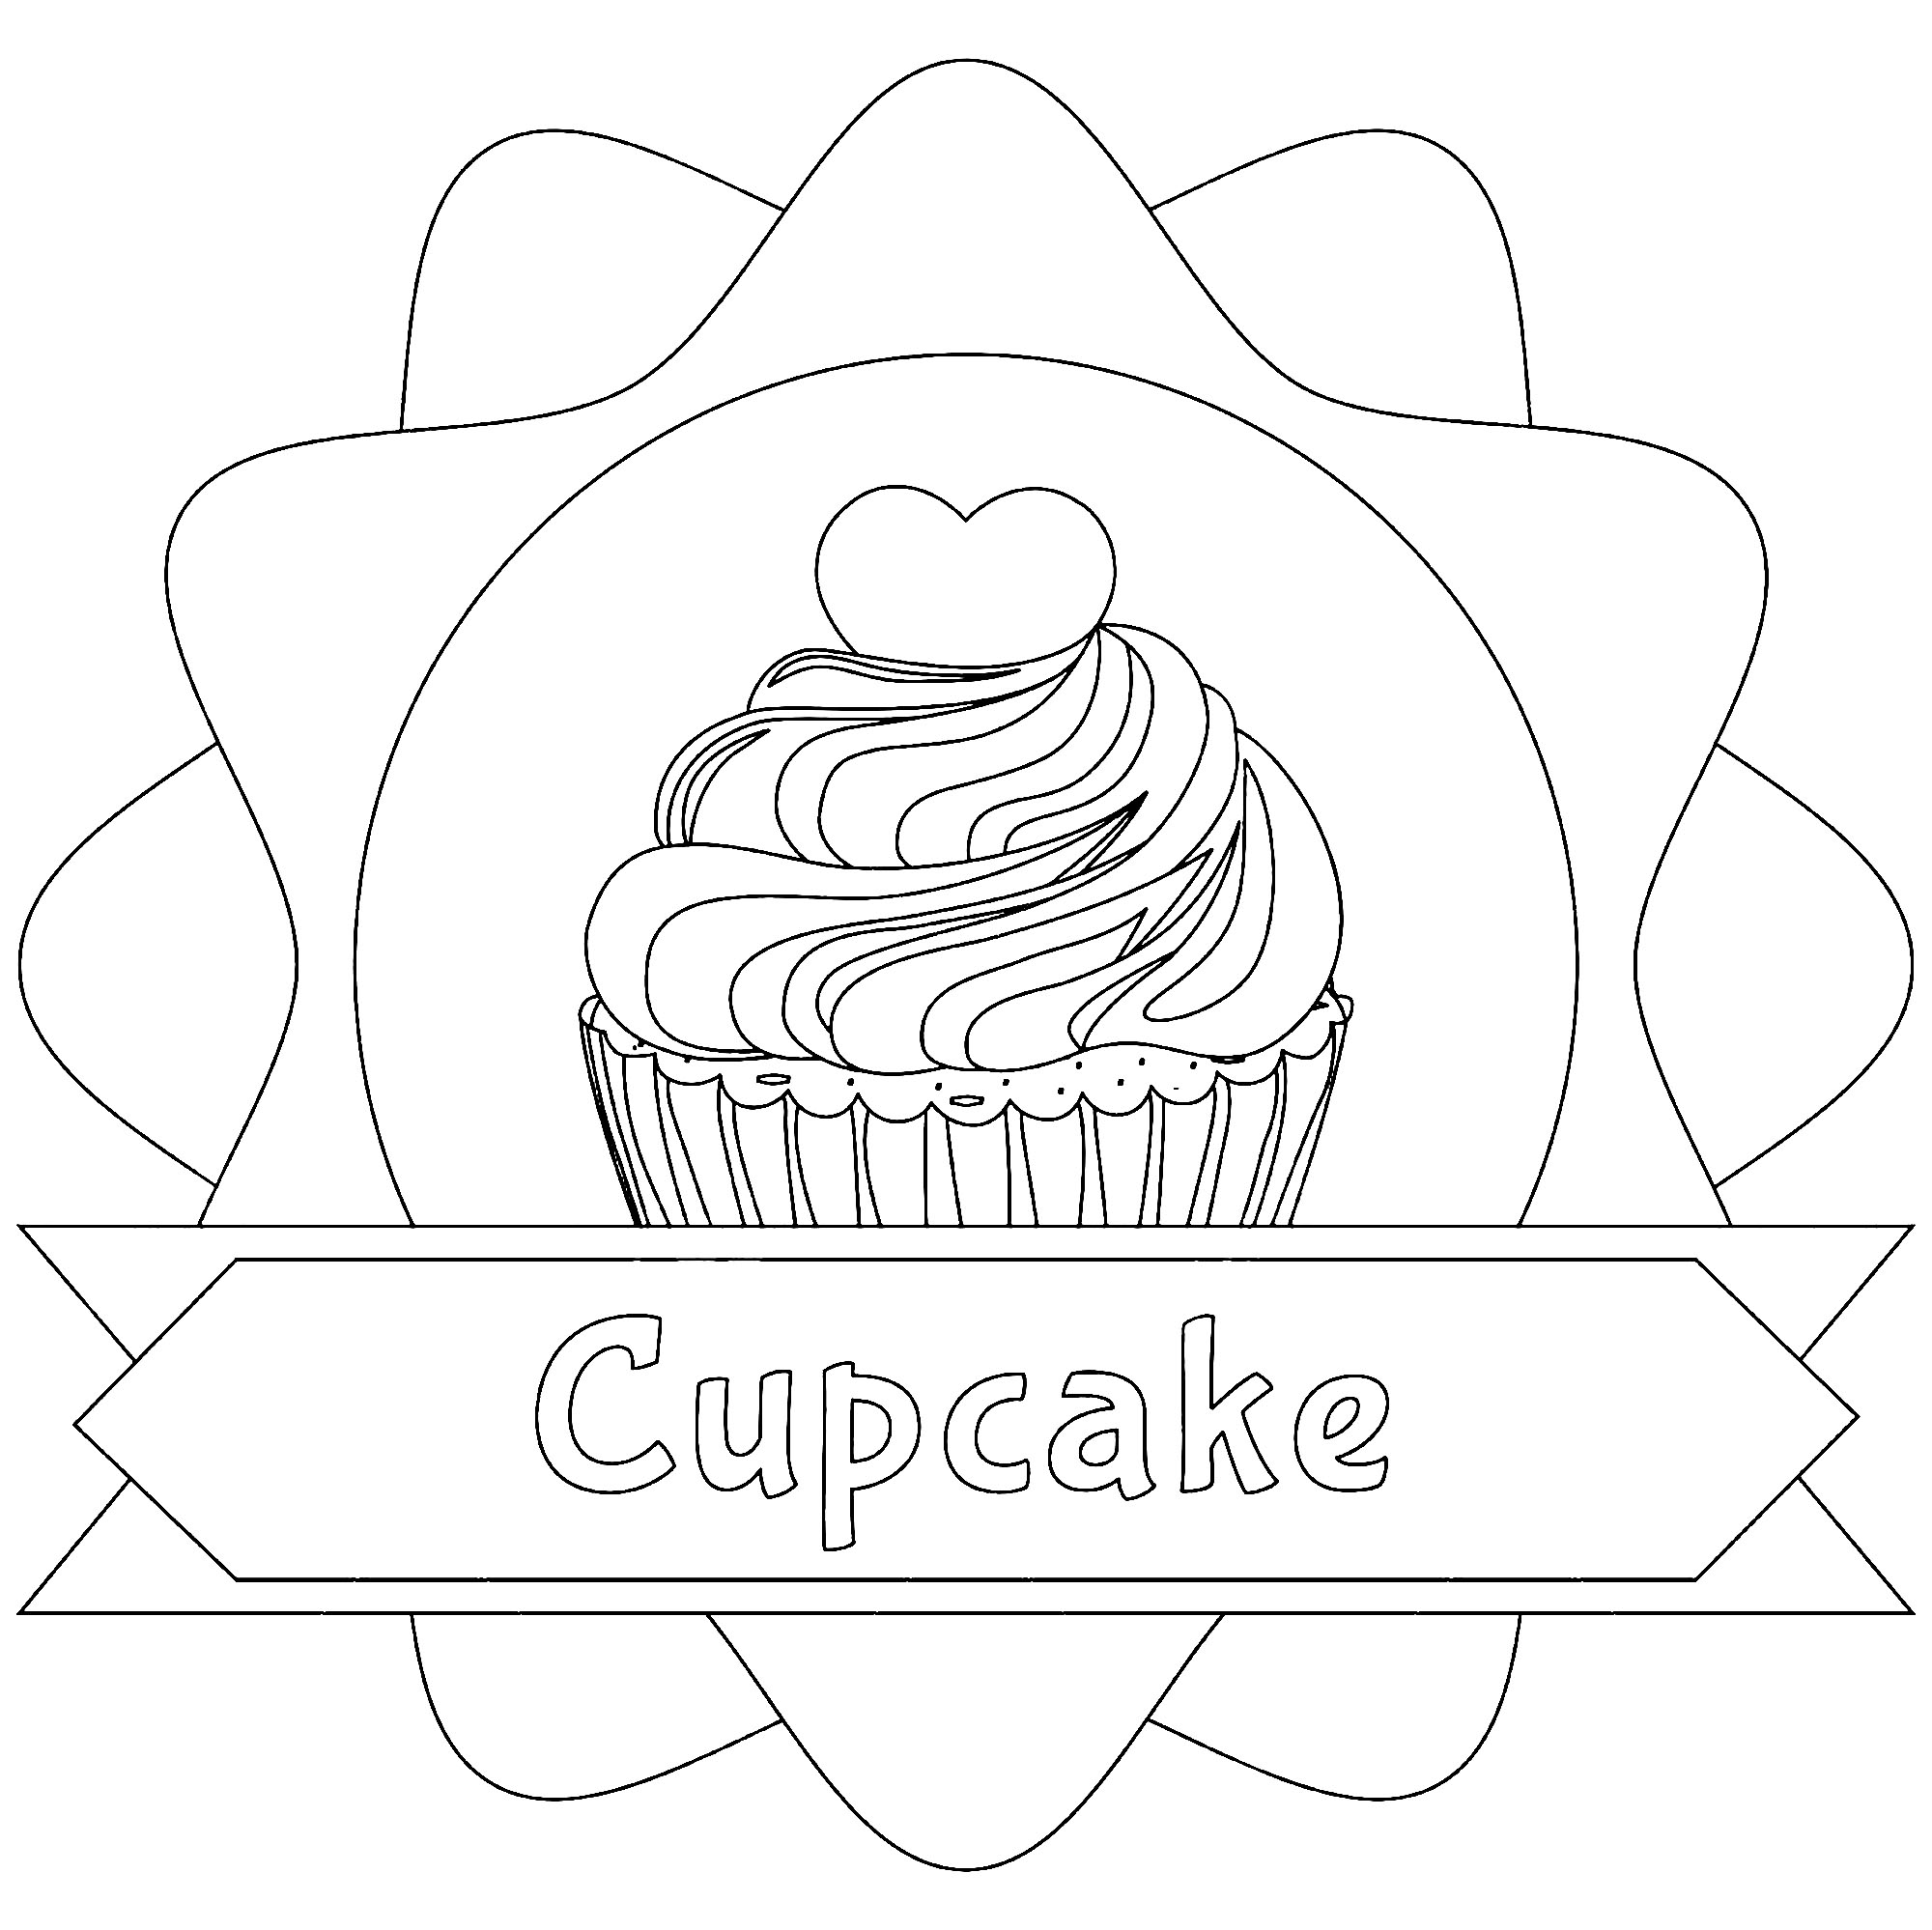 A beautiful illustration with a cupcake and the corresponding text